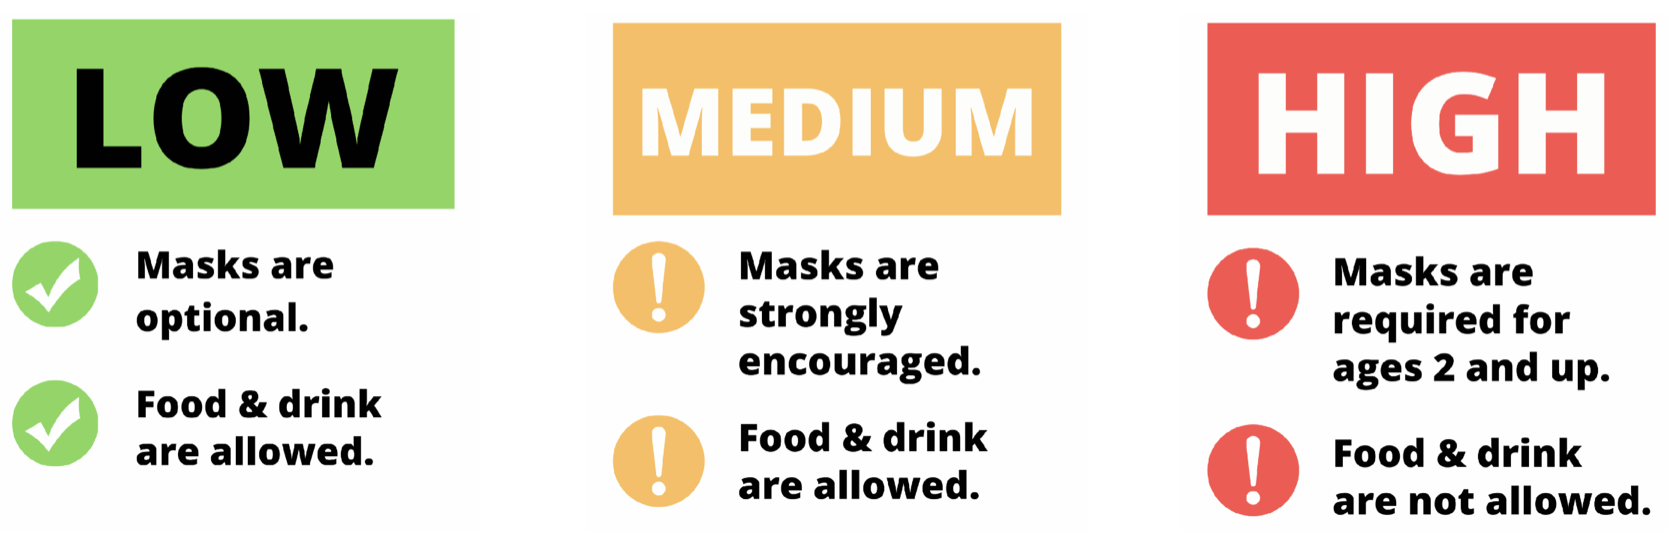 Low: Masks Optional. Medium: Masks Encouraged. High: Masks Required, No Food and Drinks Allowed.